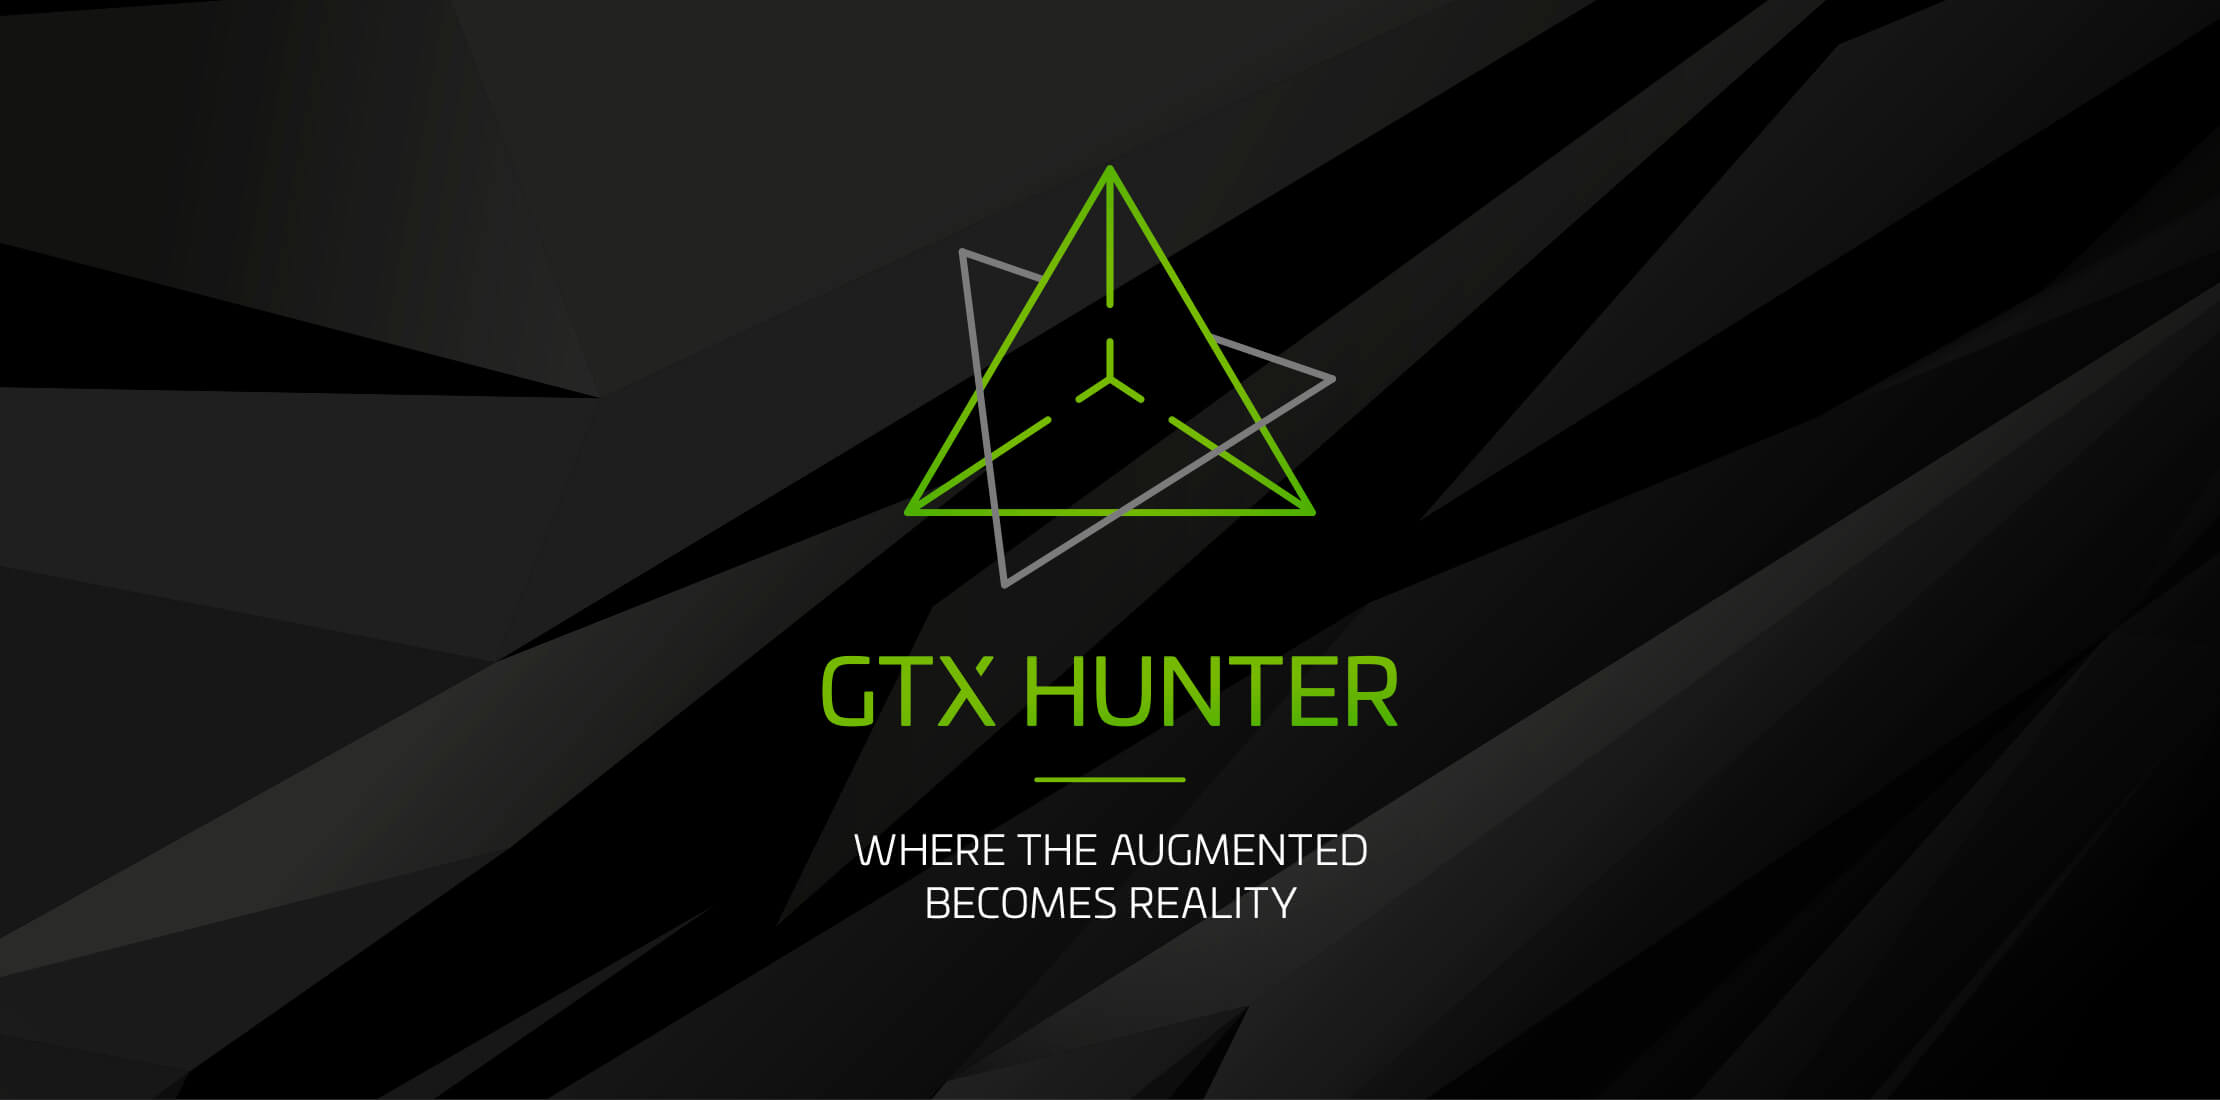 Nvidia GTX Hunter logo and tagline, with a green prism interlaced with a grey triangle on a black textured background